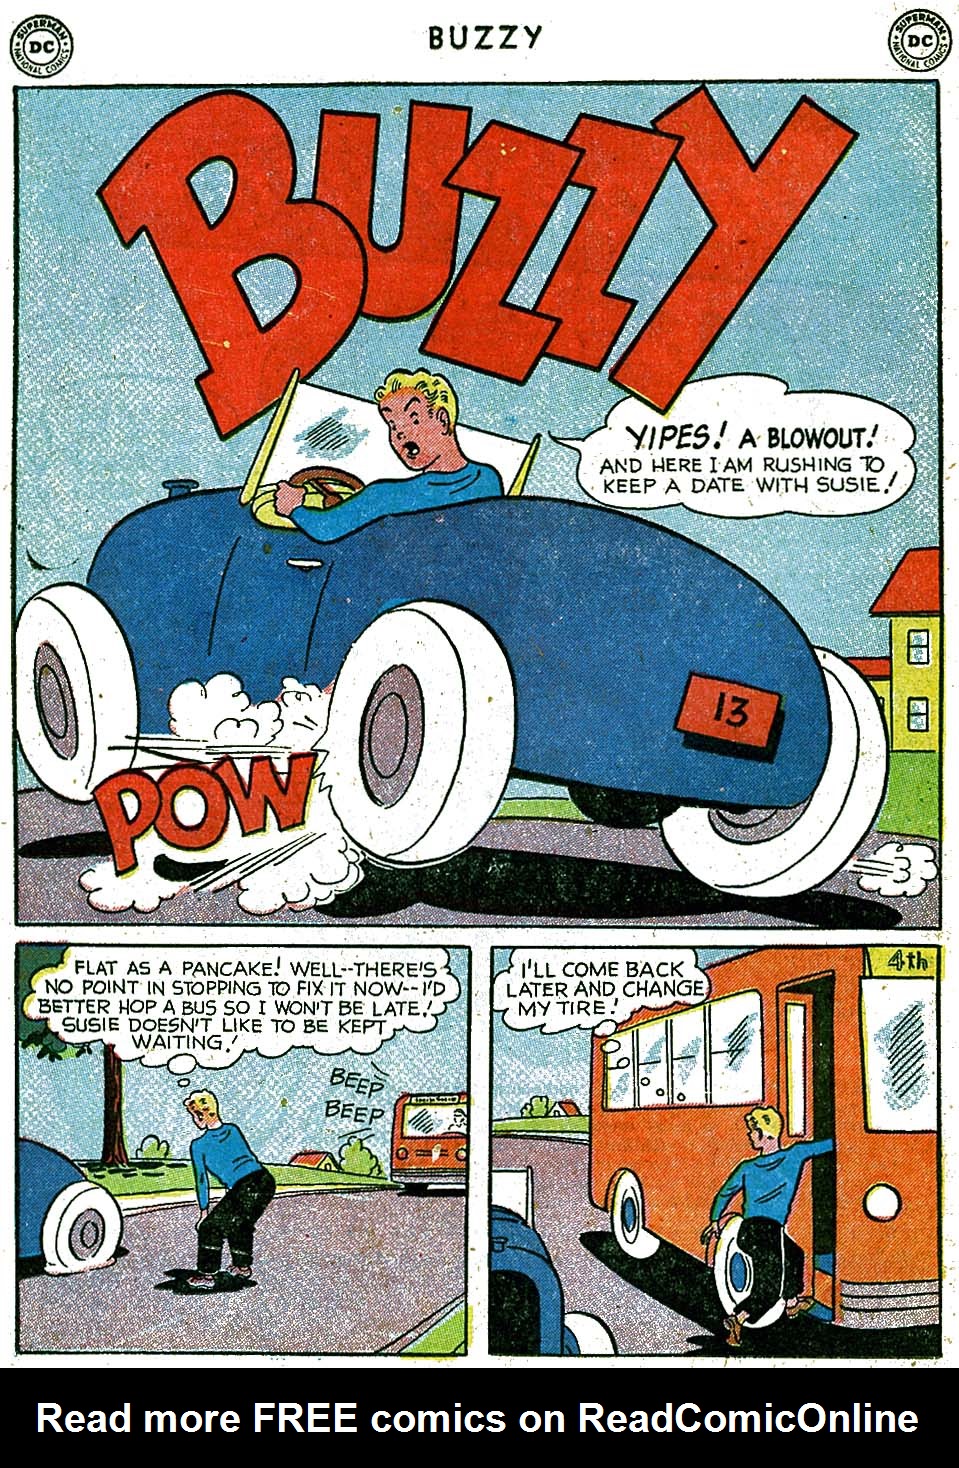 Read online Buzzy comic -  Issue #38 - 20